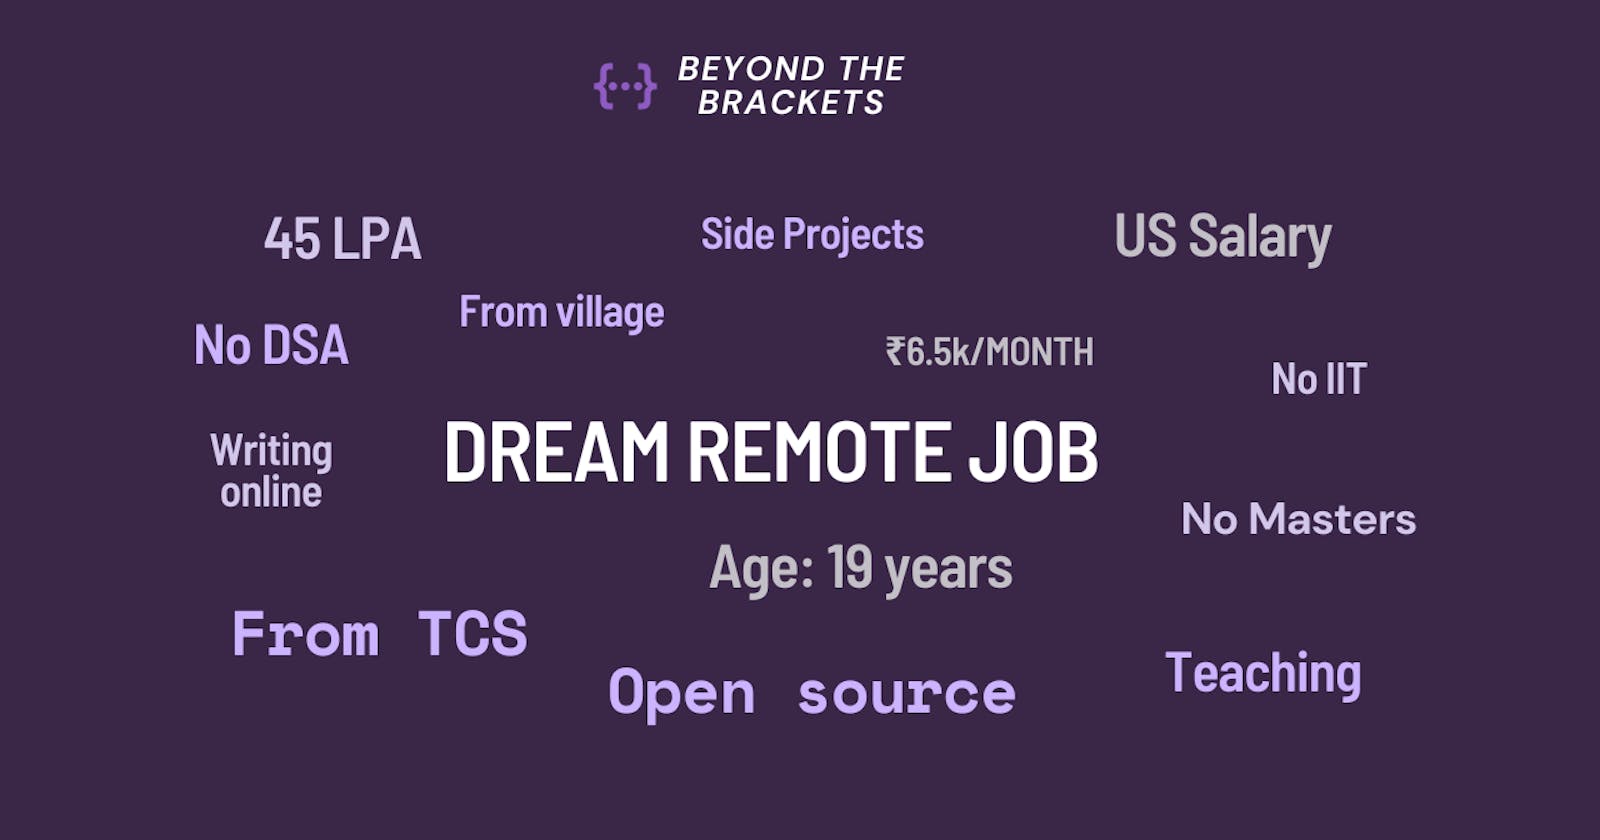 8 ways Indian developers find amazing remote jobs (without going to IIT or getting a Master's)